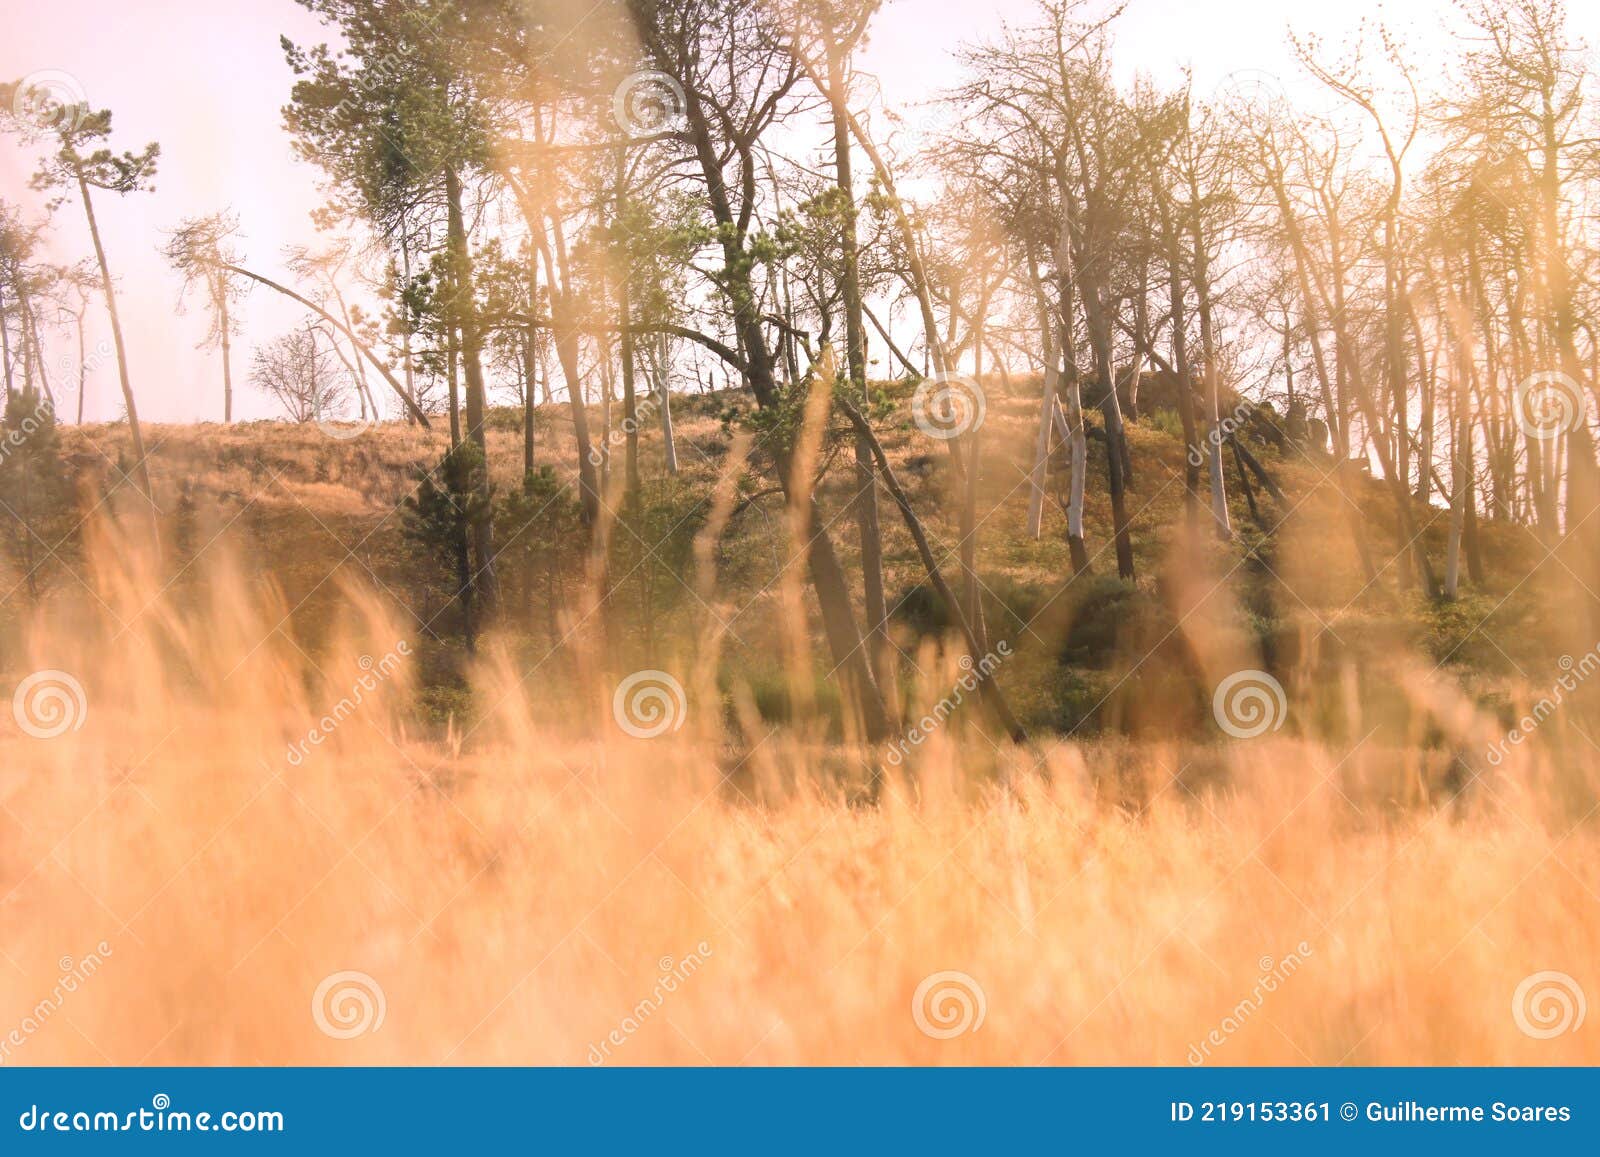 dry yellow grass field, subjective view, hidden near ground, low angle view